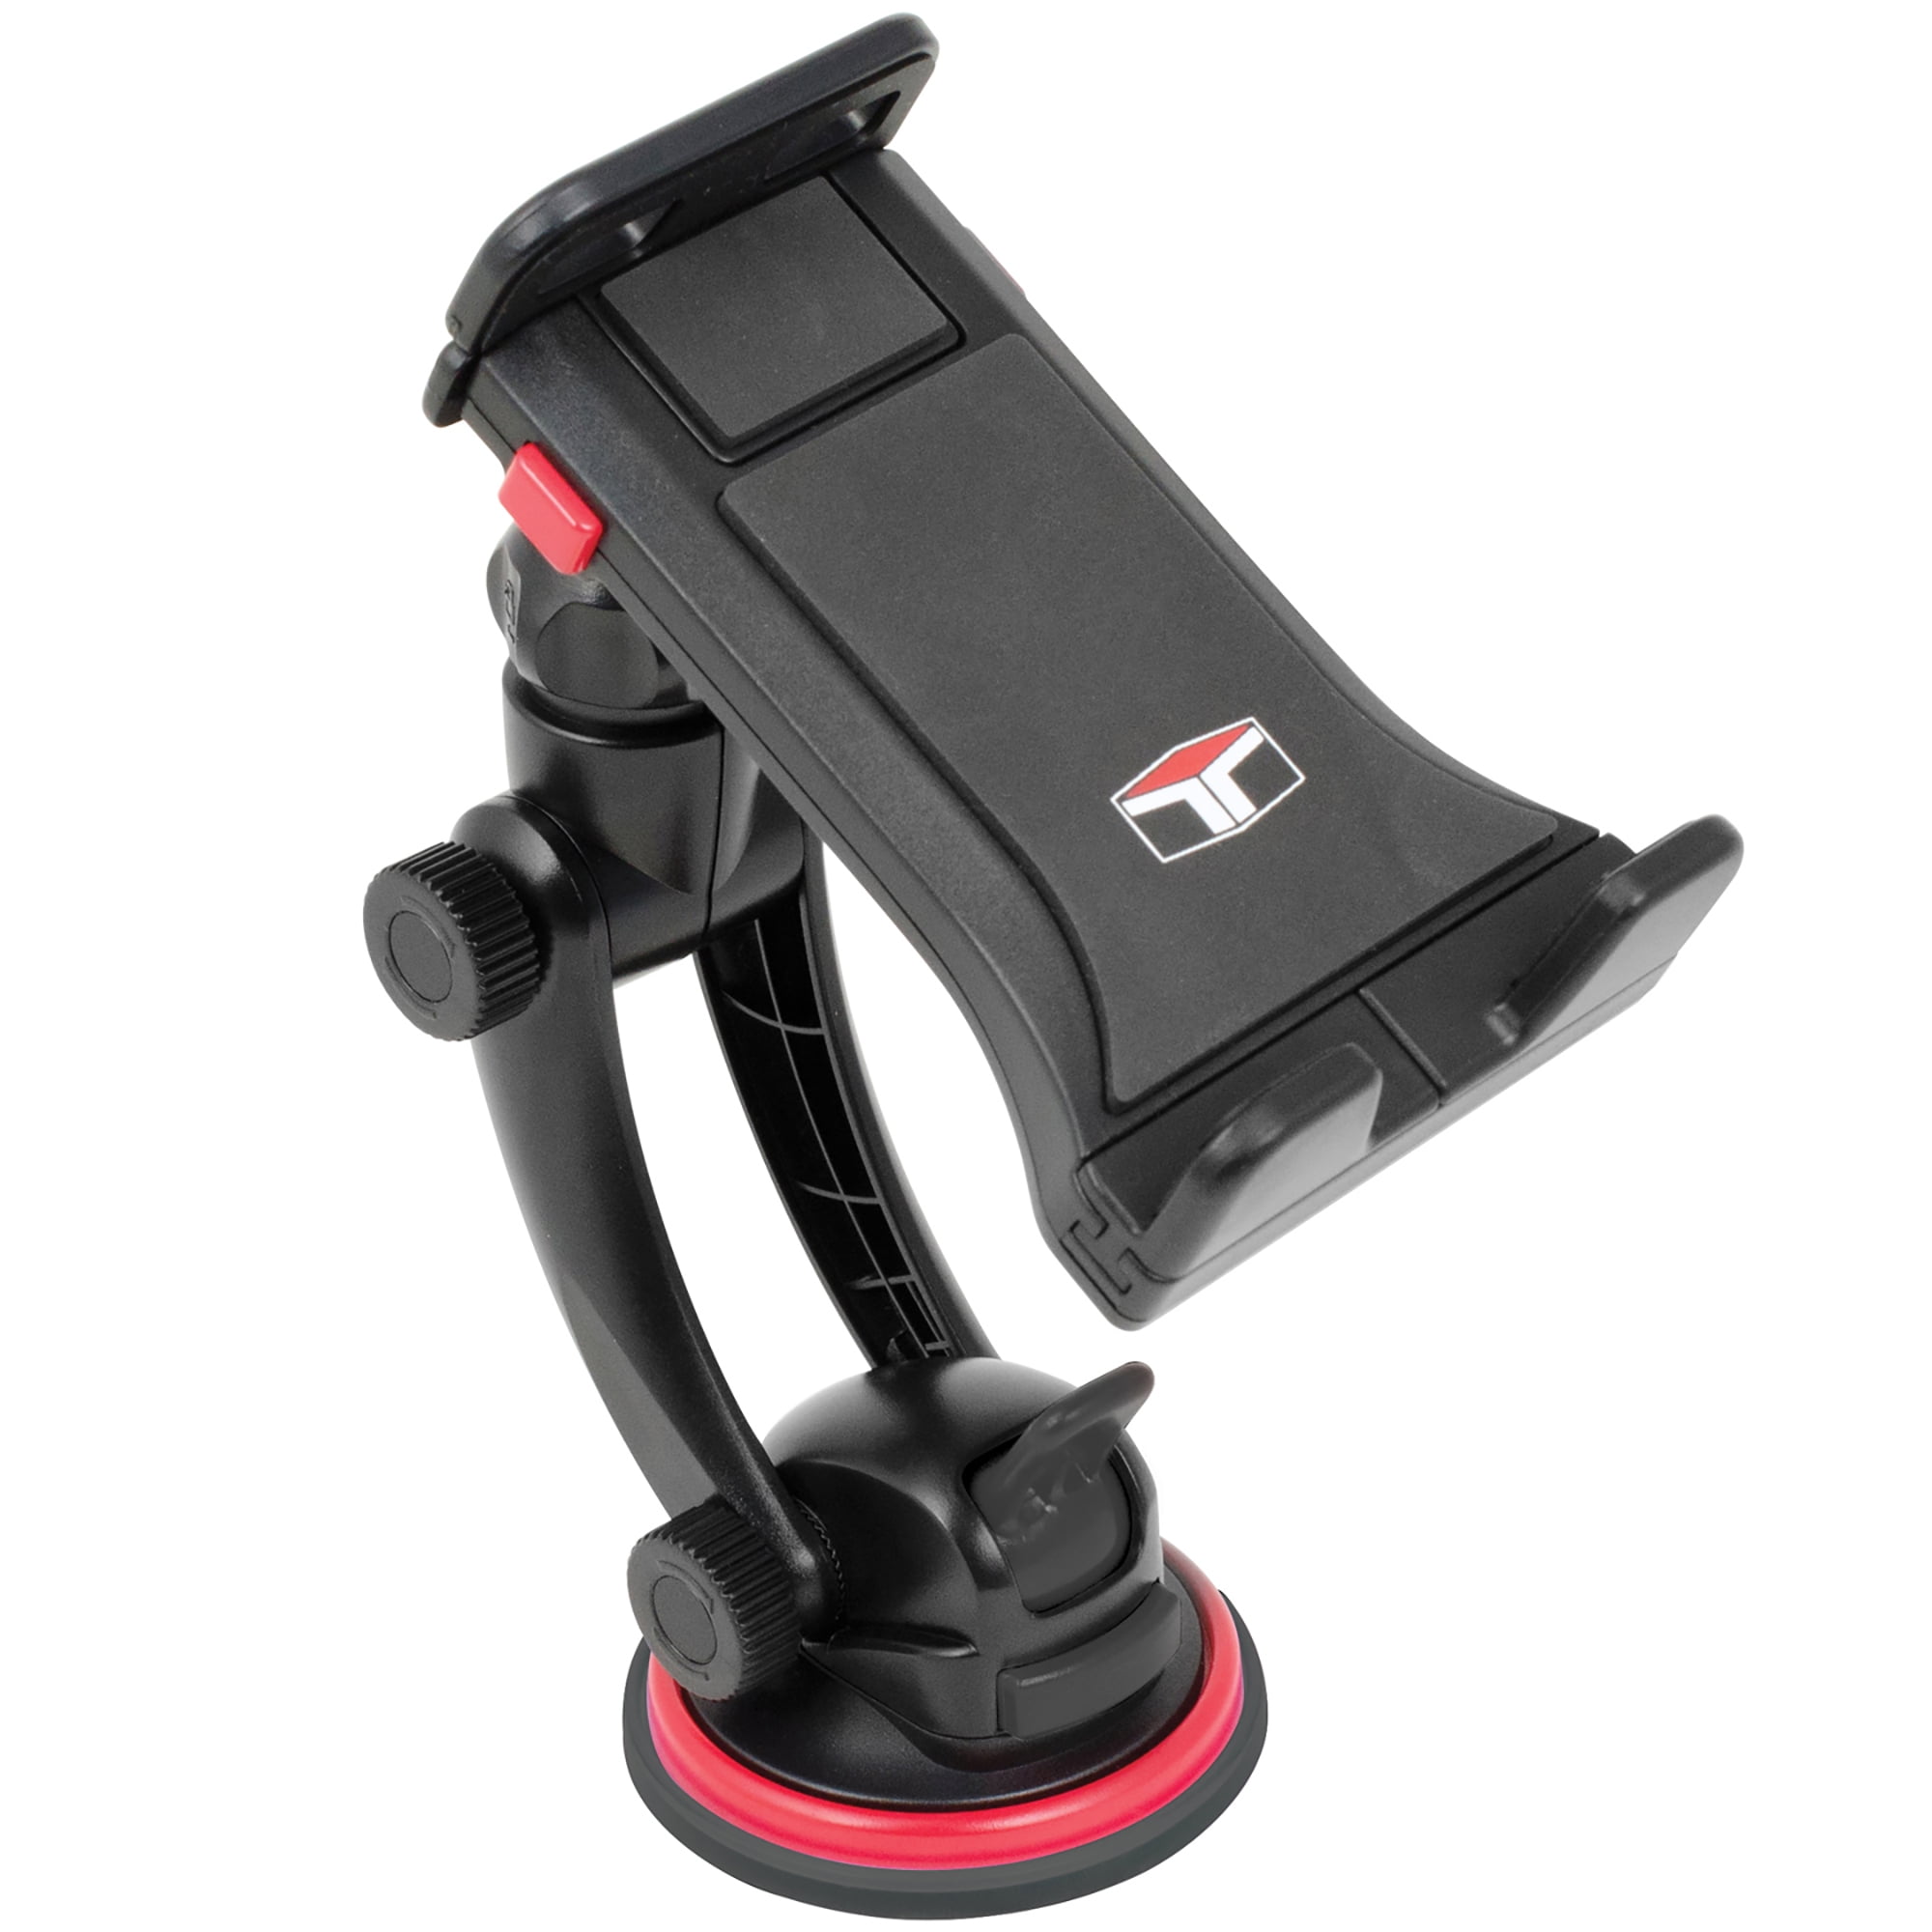 Tuff Tech Super Stick Universal Car Mount Phone Holder Desk Stand with Suction Cup Base and Adjustable Arm for -iPhone, Samsung, LG, Moto, Huawei, Smartphones